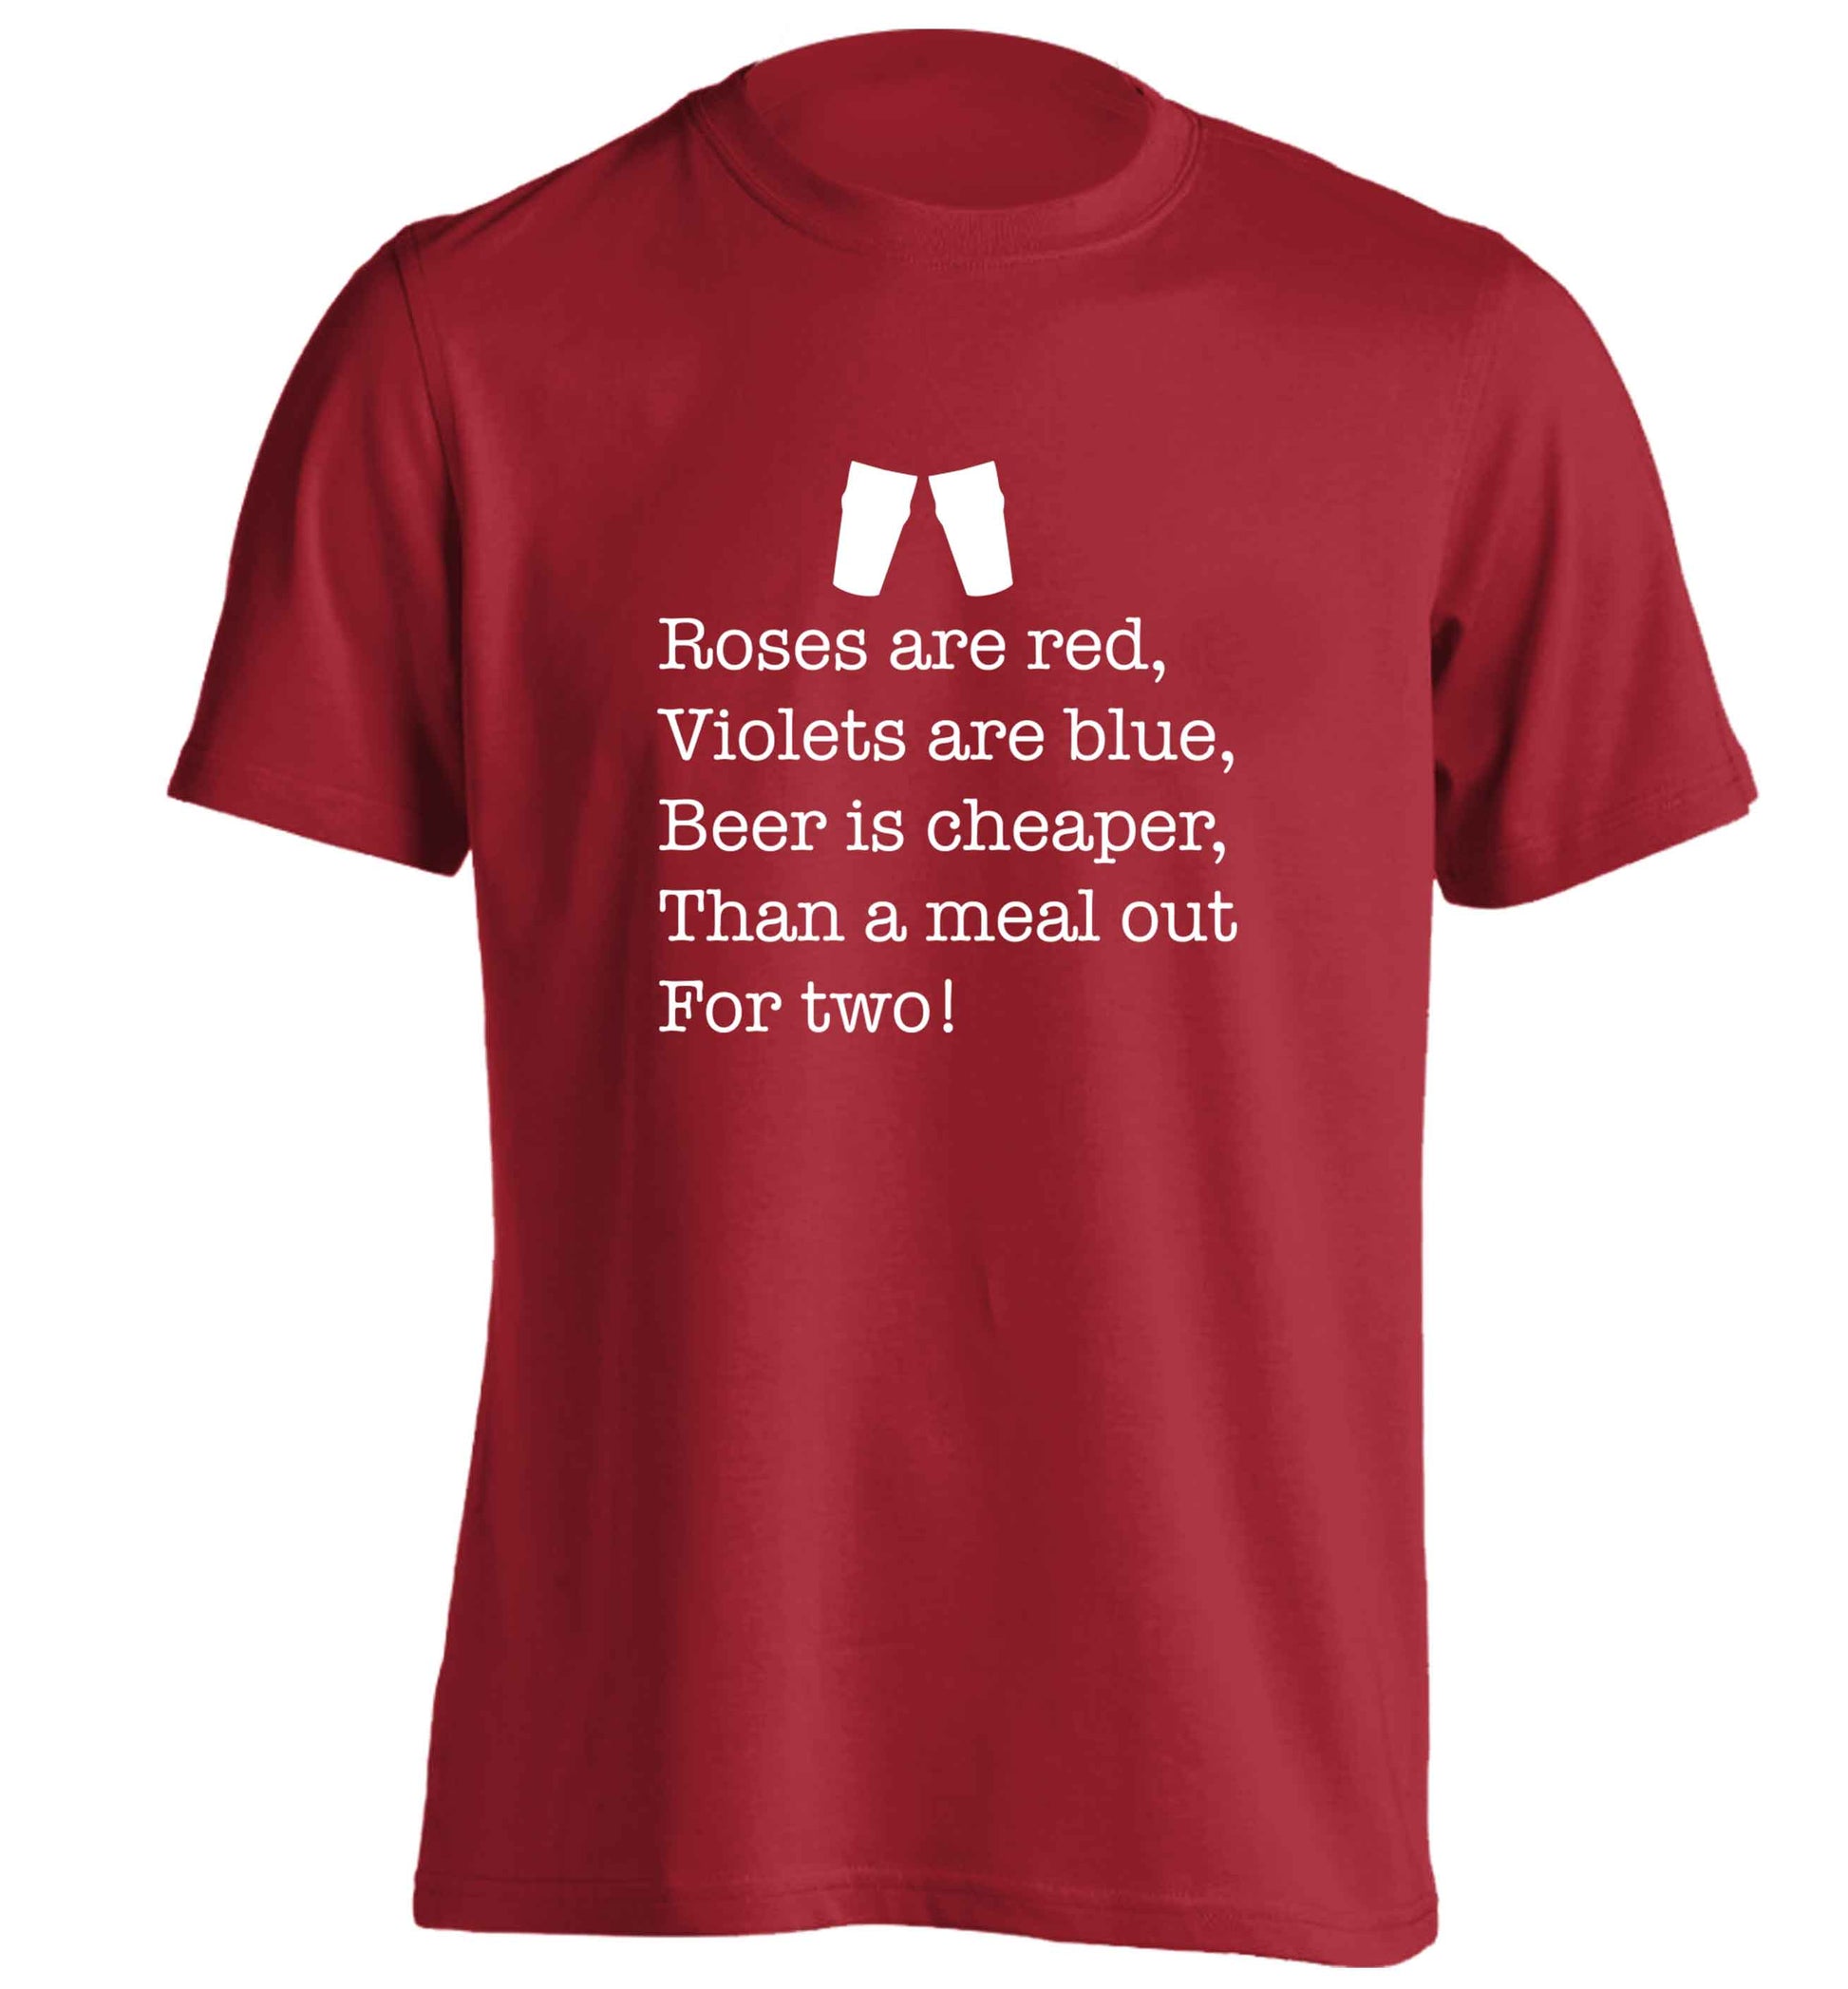 Roses are red violets are blue beer is cheaper than a meal out for two adults unisex red Tshirt 2XL